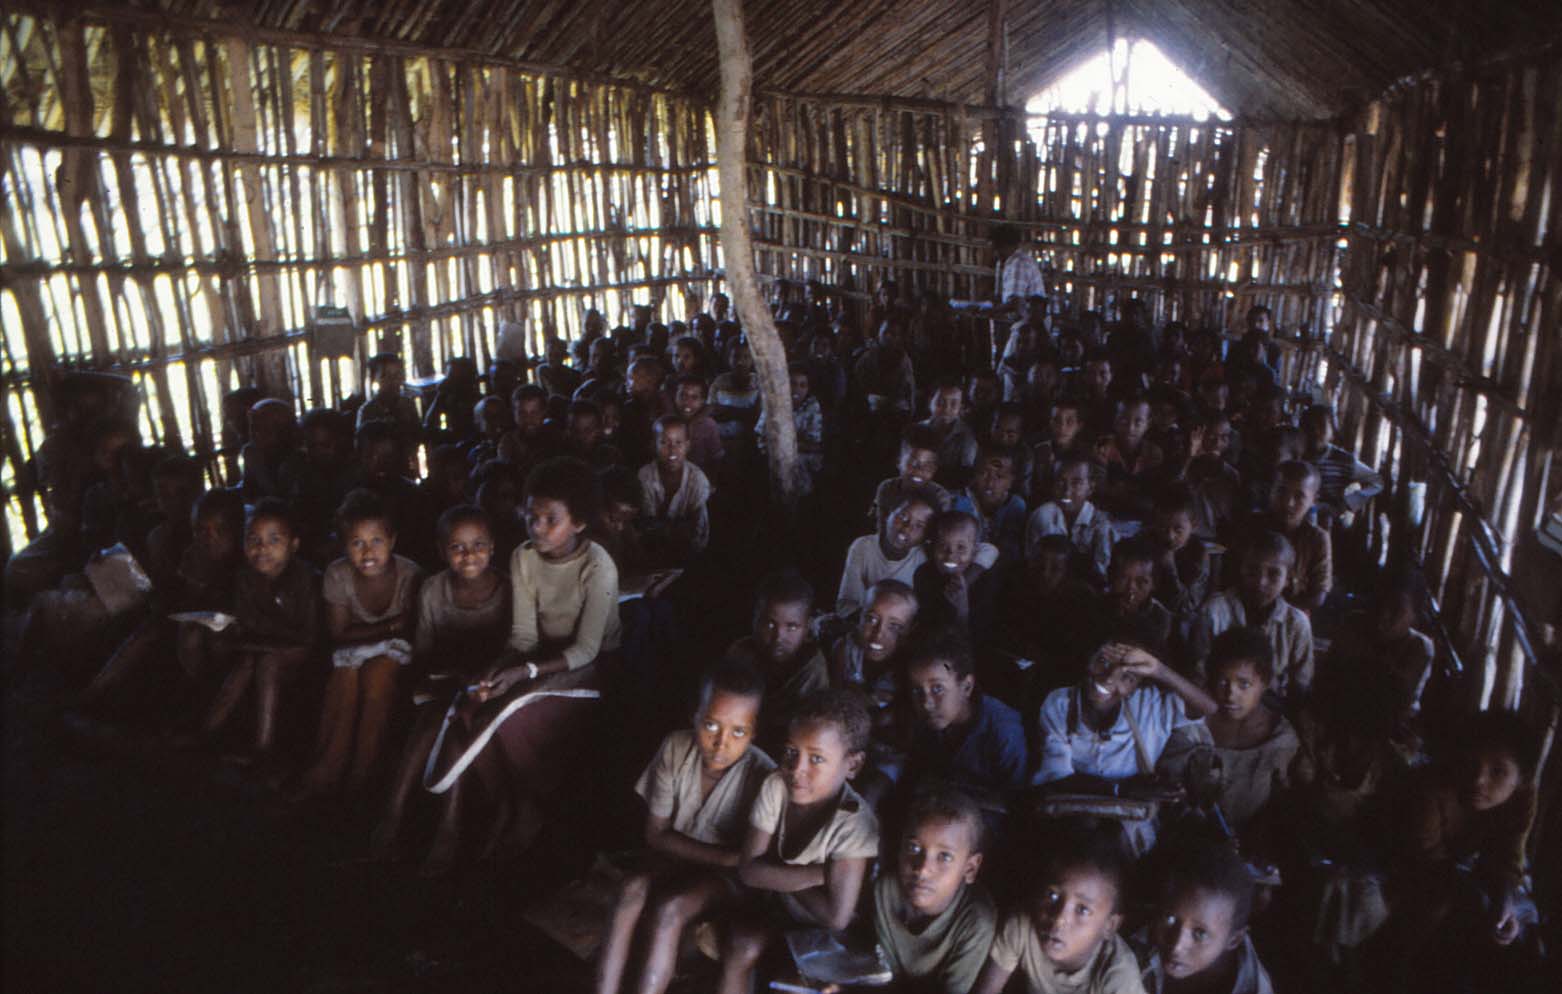 Schools in Ethiopia | Letter from Lund